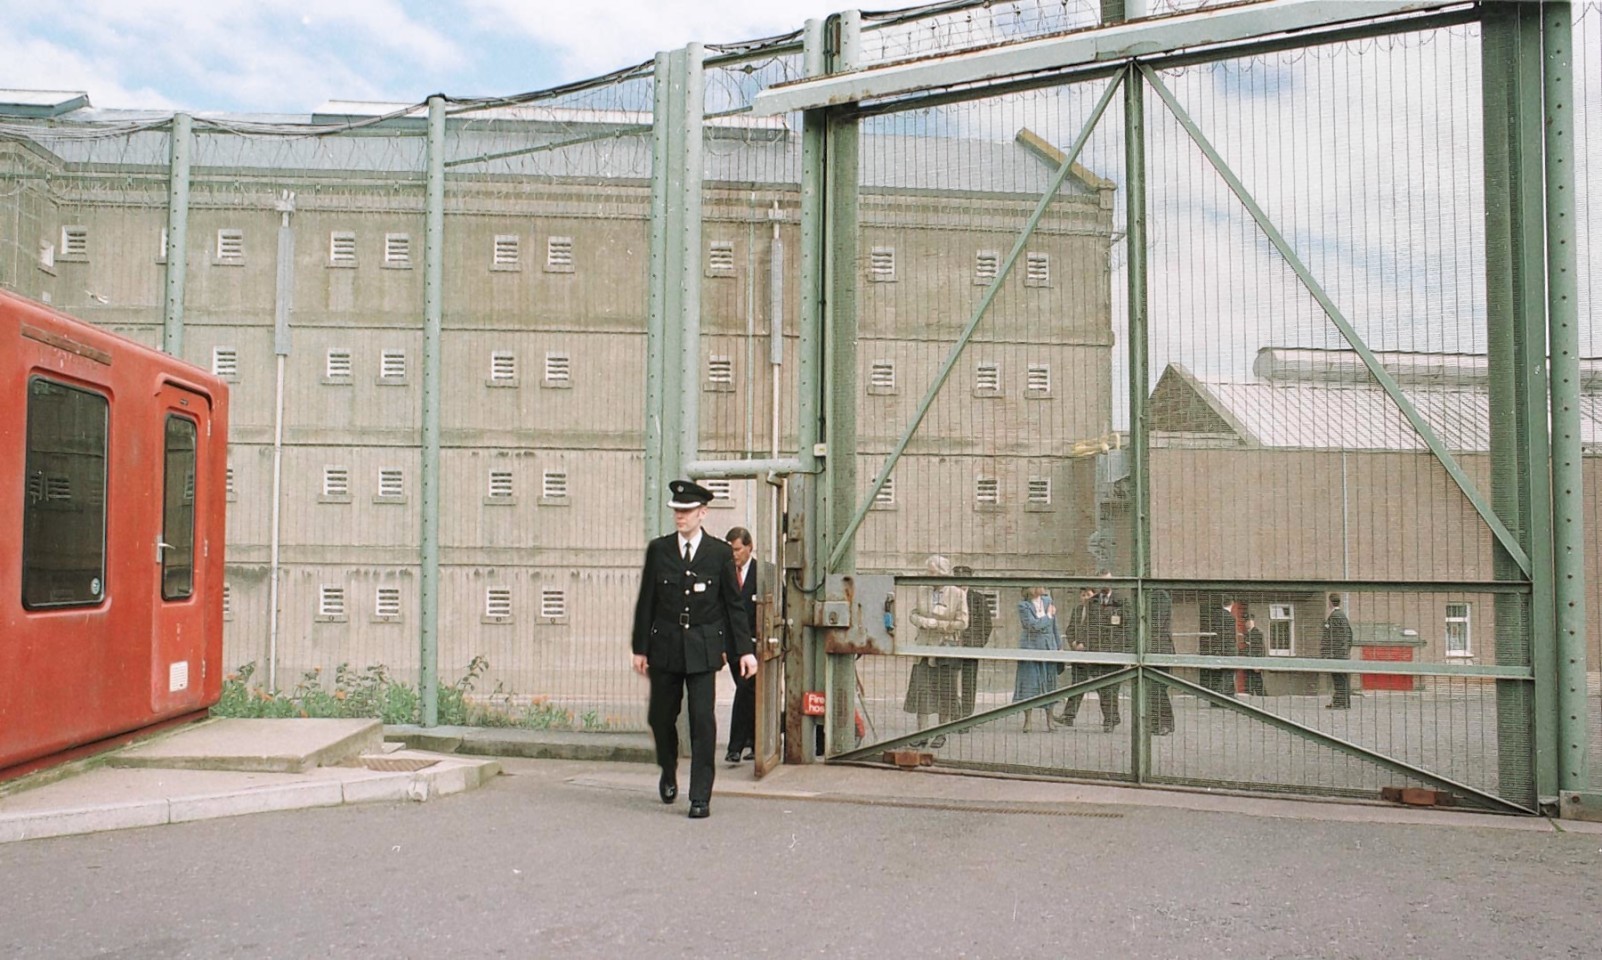 CLOSE UP VIEW OF THE HIGH-SECURITY PETERHEAD PRISON EE 8/03/97